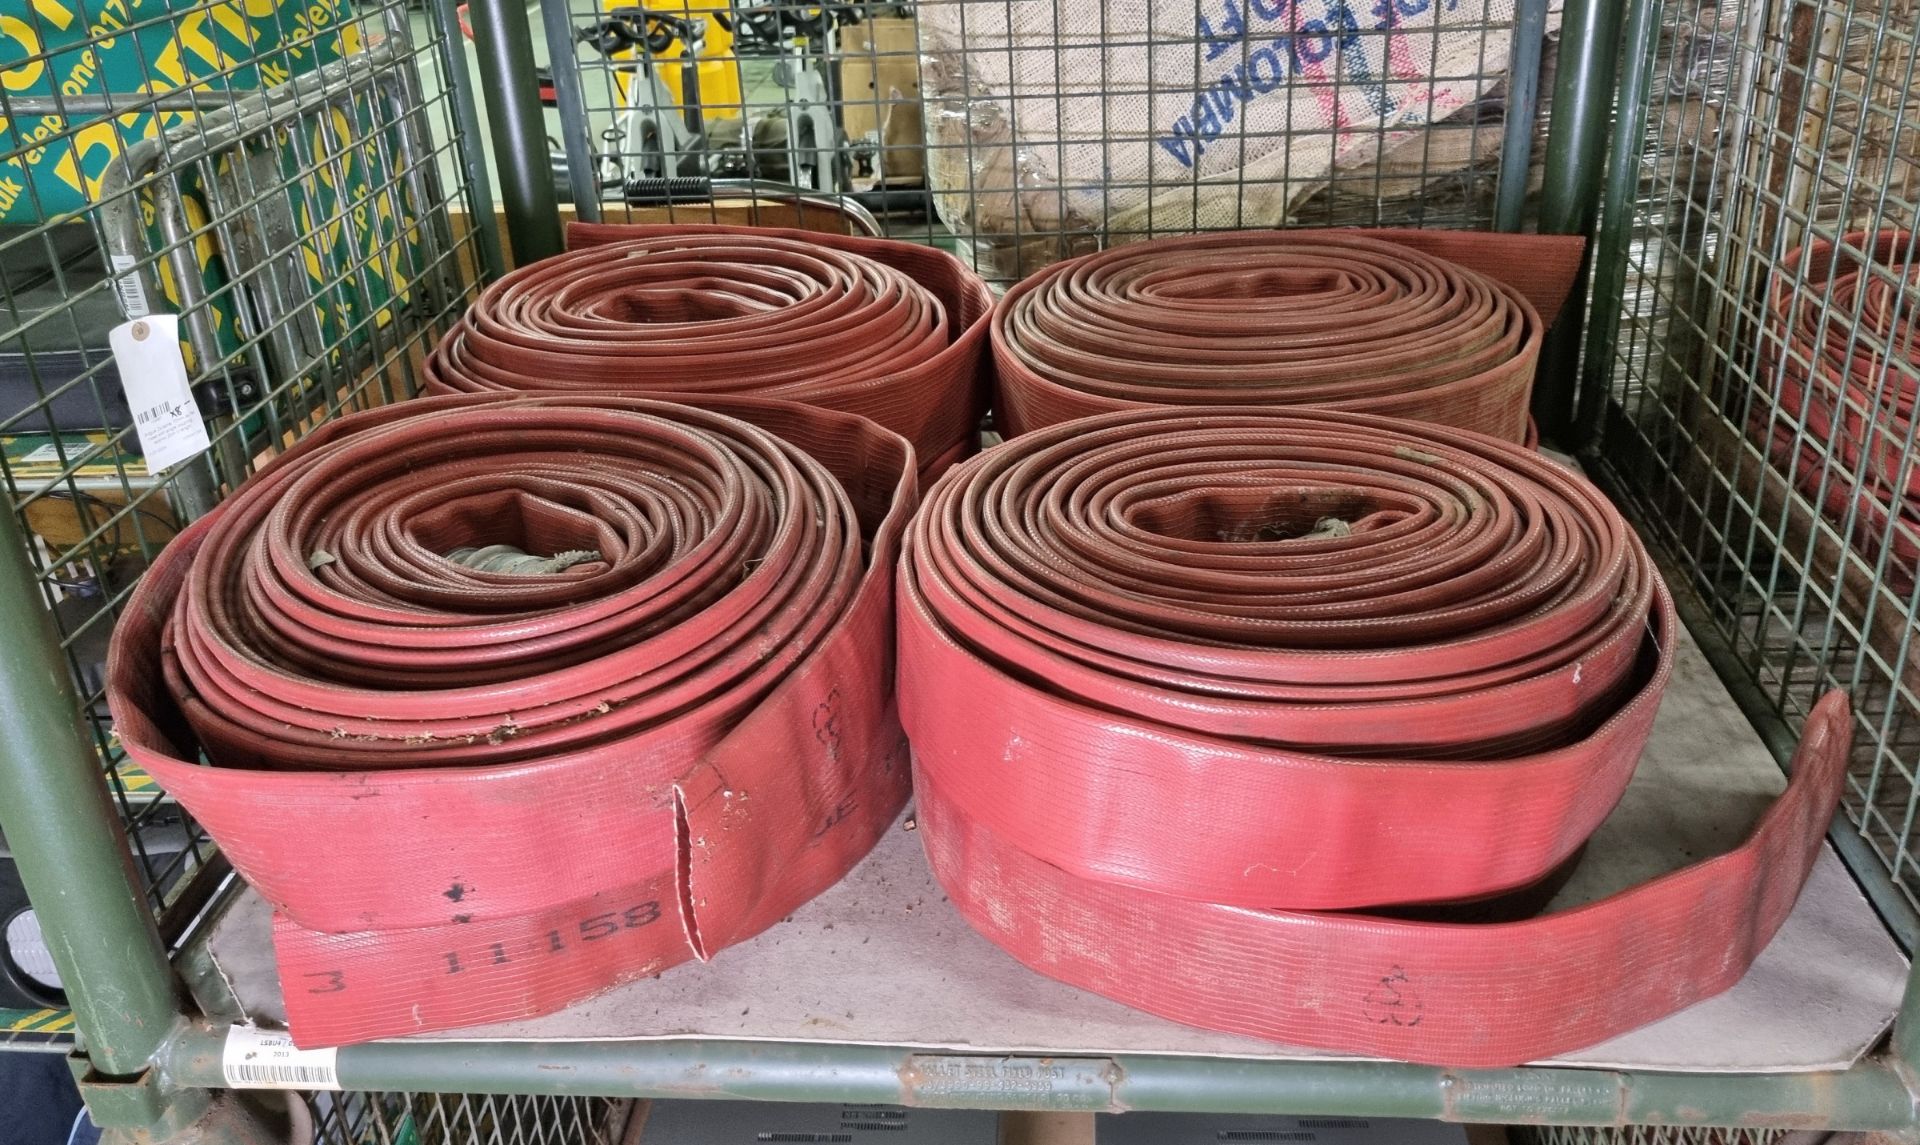 8x Angus Duraline 70mm lay flat hoses with single coupling - approx 20m in length - Image 2 of 4